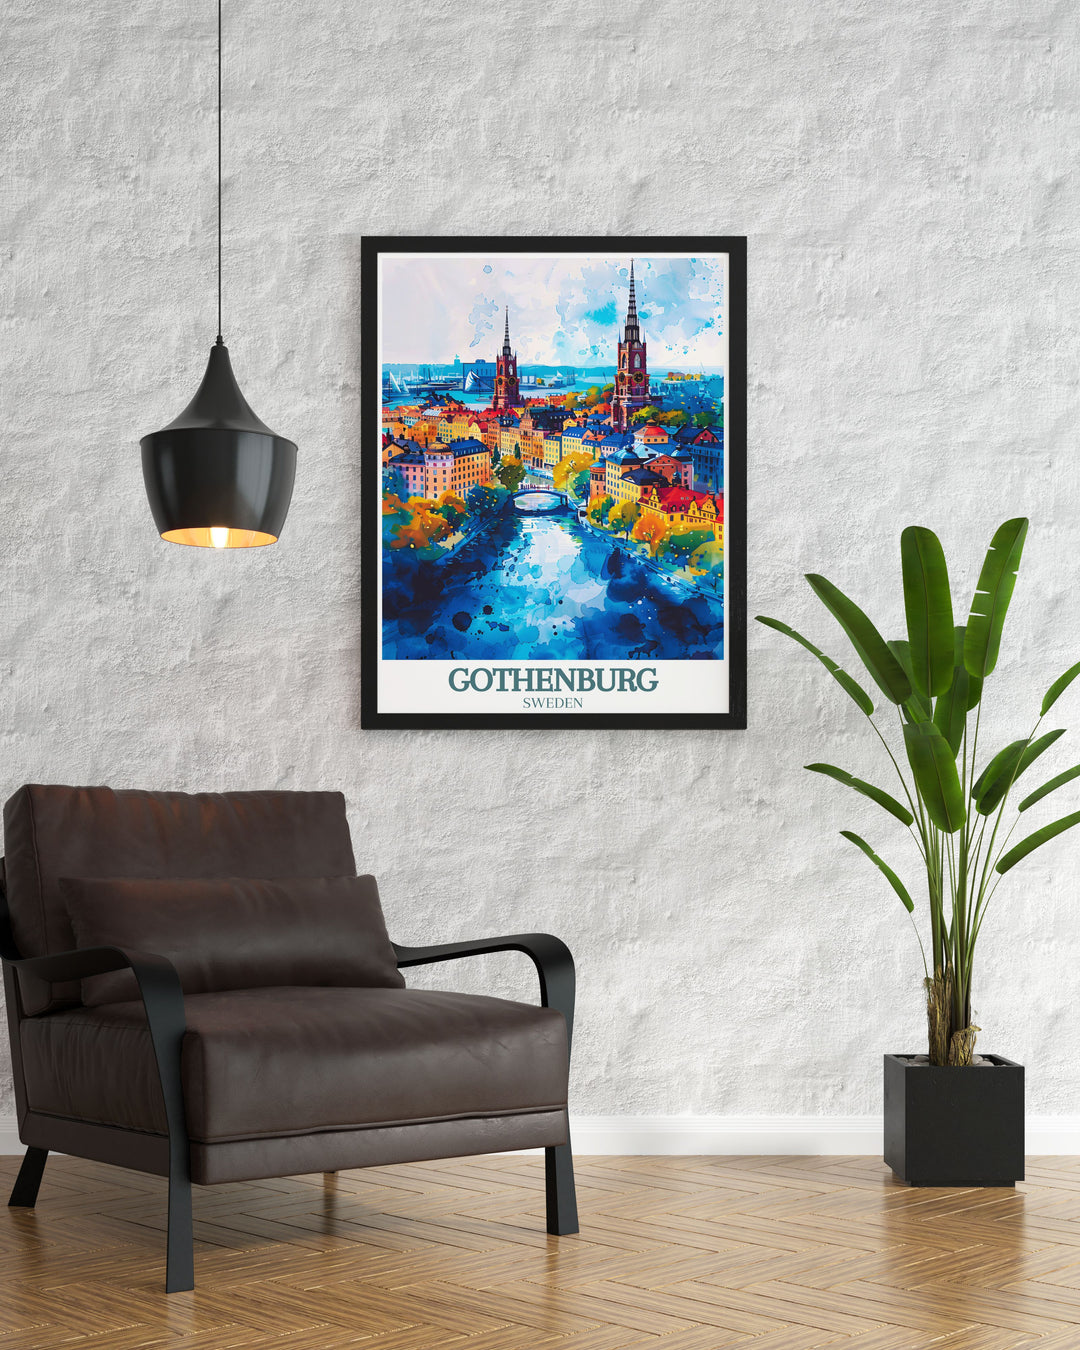 Featuring the stunning architecture of Oscar Frederik Church, this travel poster captures the churchs Gothic Revival style and detailed craftsmanship. Perfect for those who love historical architecture, this artwork brings a piece of Gothenburgs splendor into your home.